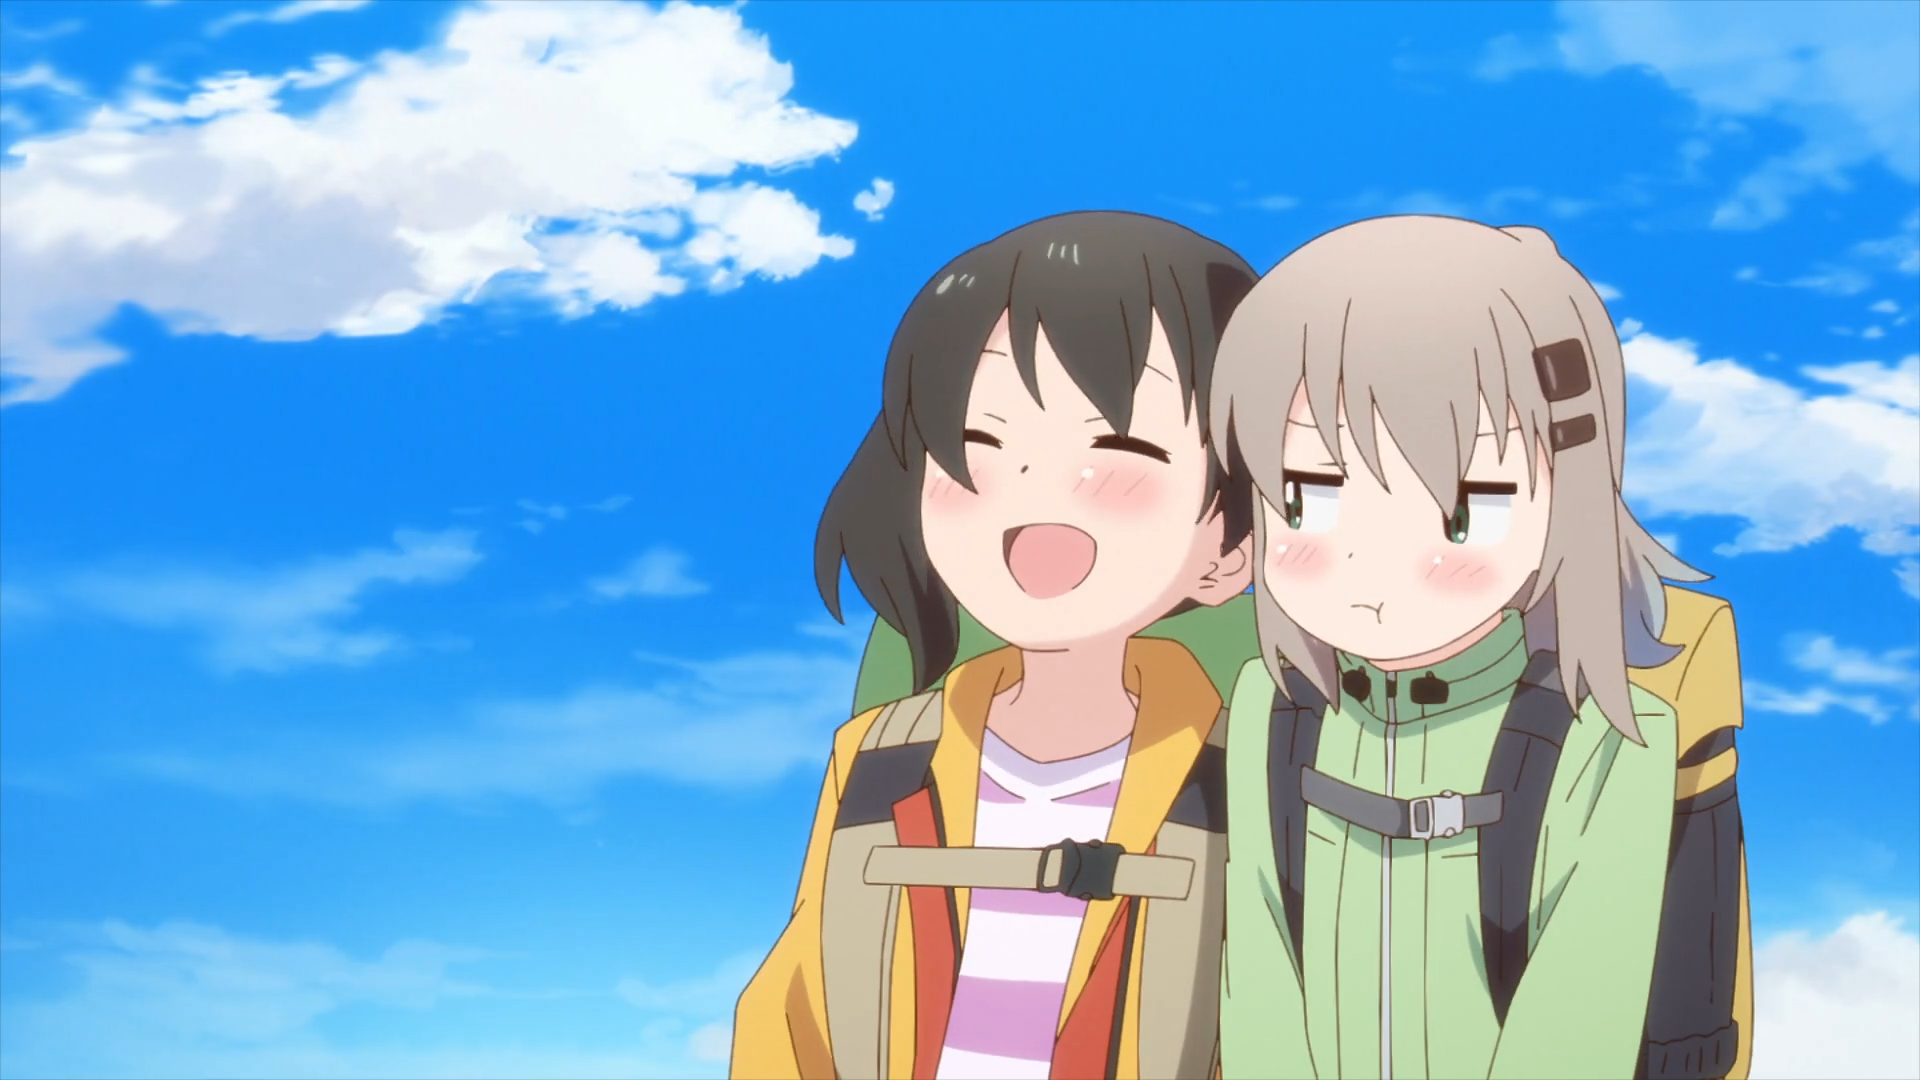 Hikari's Big Date Plans, Together For a White Christmas – Yama no Susume: Next  Summit Review and Reflections At the Halfway Point